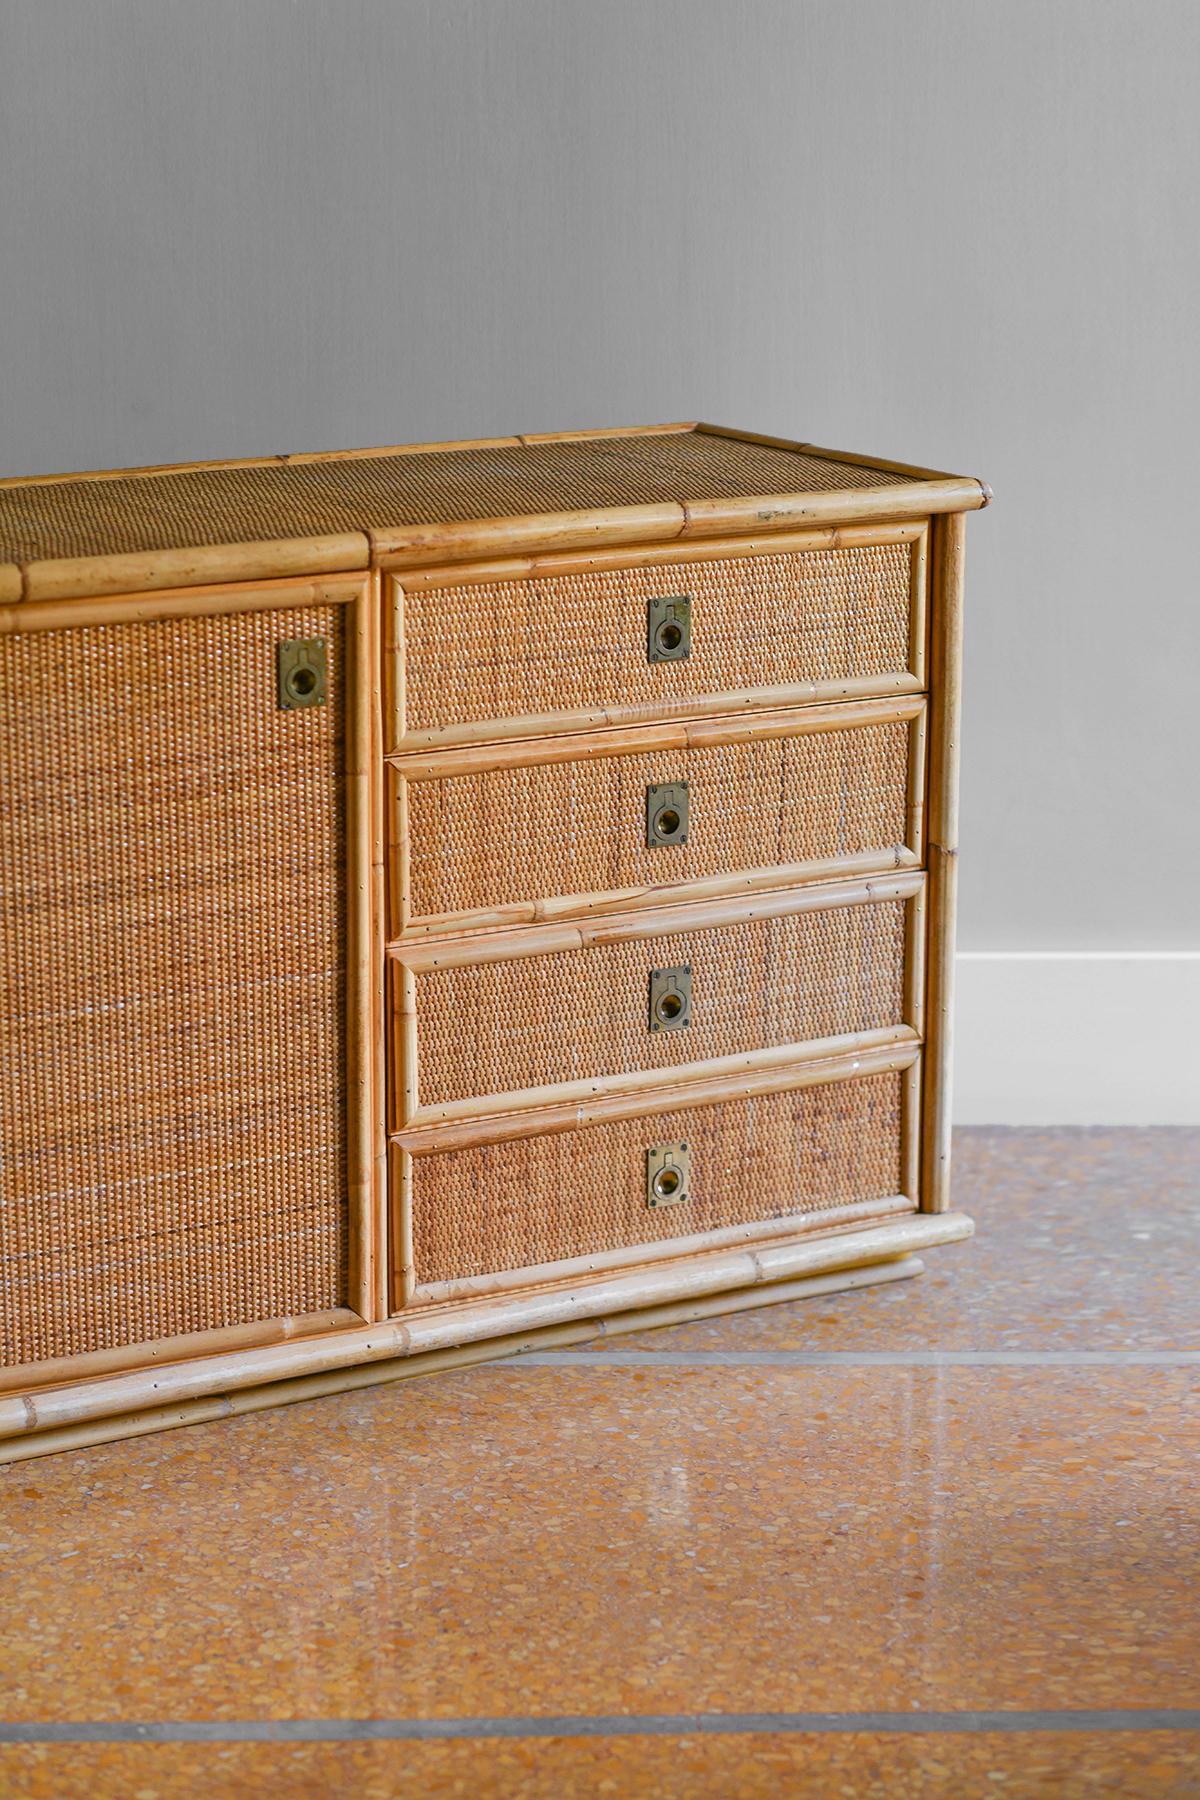 Hand-woven rattan and bamboo sideboard, 1970
Product details
Dimensions: 123 W x 75 H x 46 D cm
Production Dal Vera, Italy 1970. Brass handles.